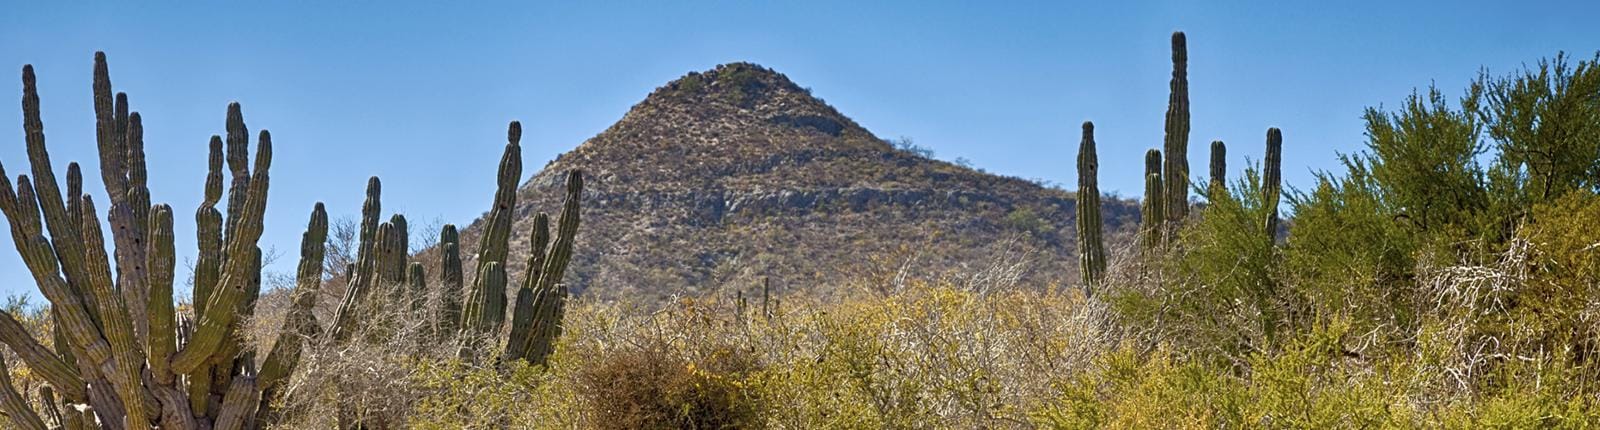 Scene of a large mountain and cactus in a dry region of Cabo San Lucas, Mexico